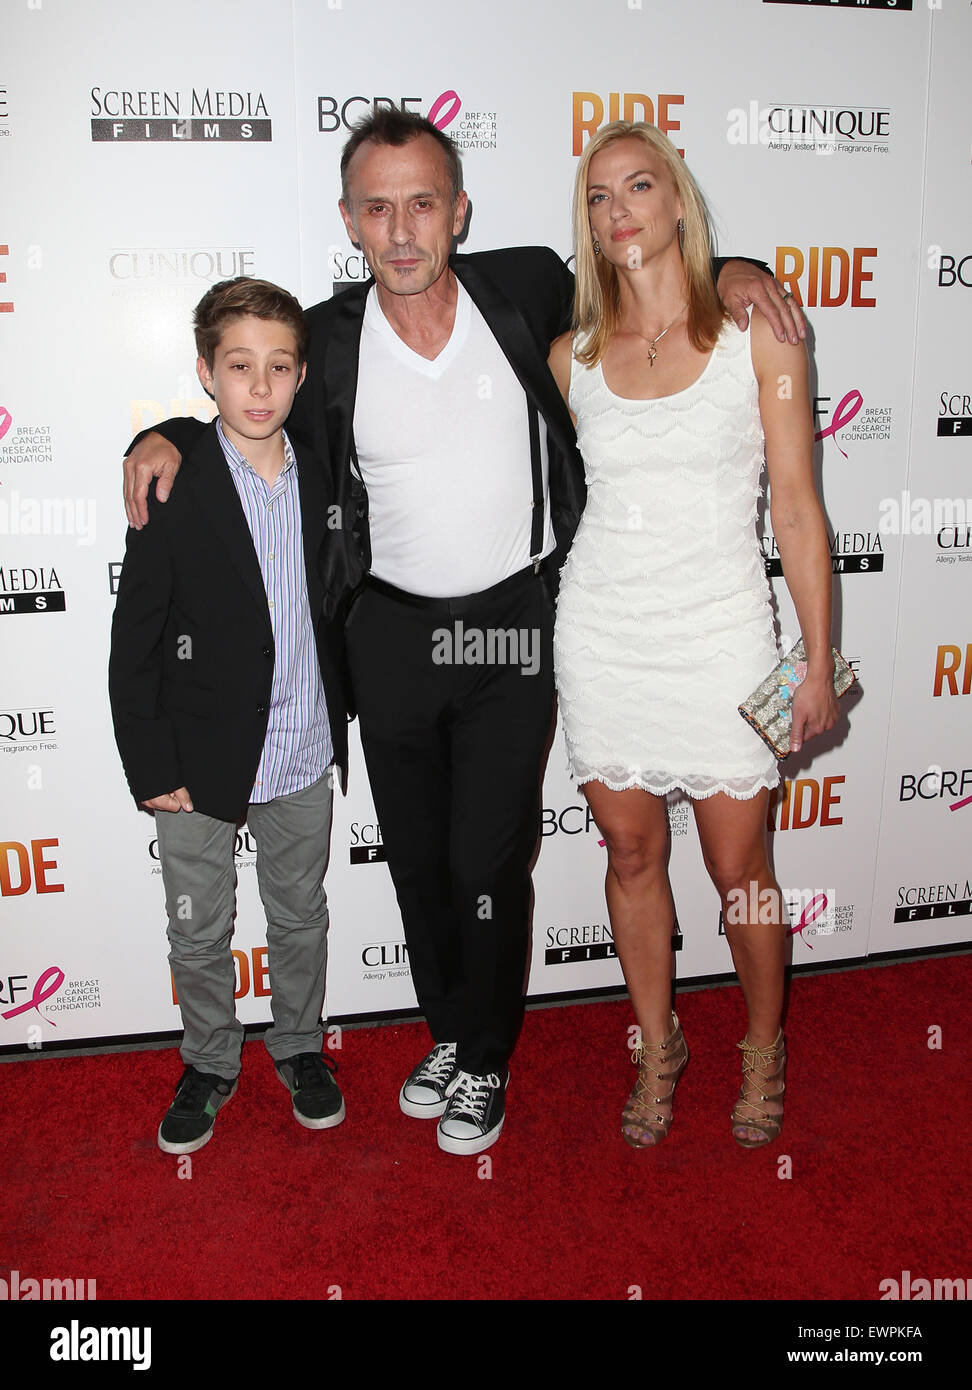 Ride Los Angeles Premiere  Featuring: Robert Knepper, Nadine Kary, Benjamin Knepper Where: Hollywood, California, United States When: 29 Apr 2015 Stock Photo